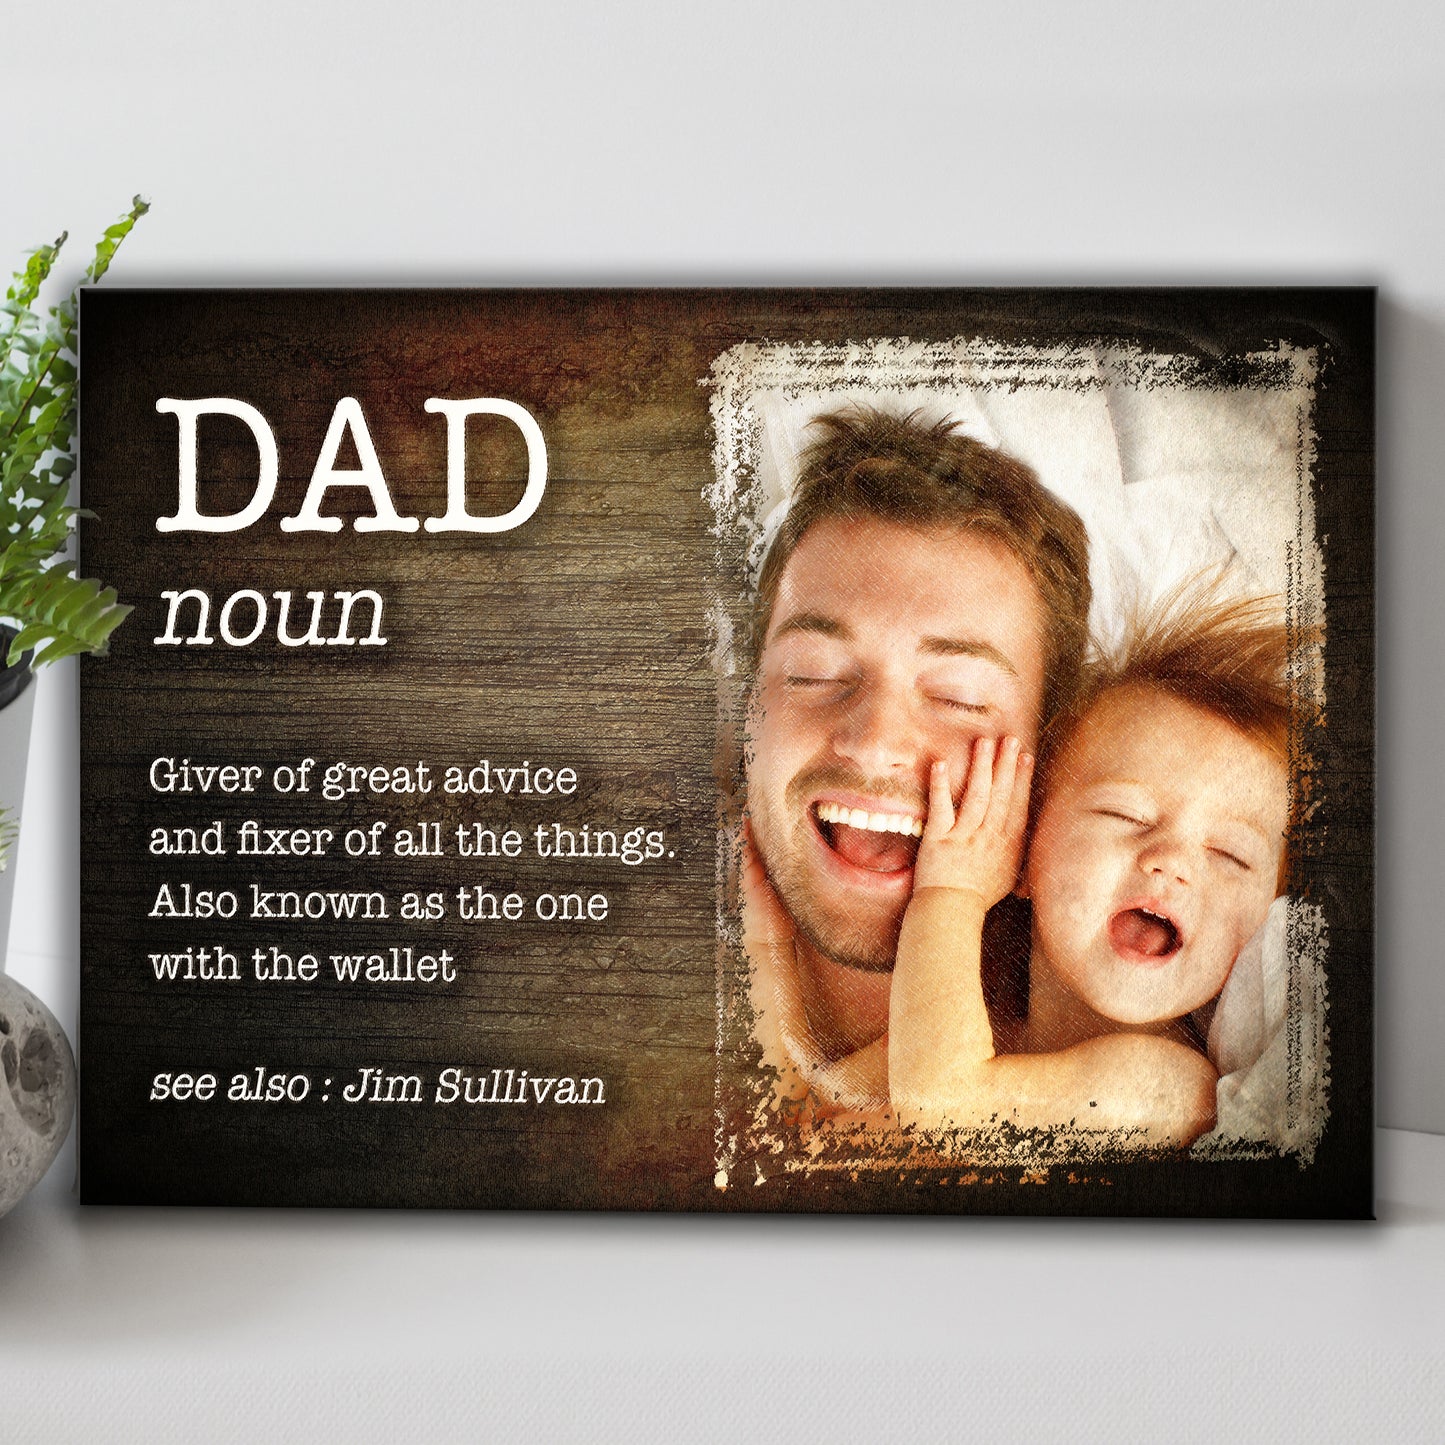 Fixer Of All Things Happy Father's Day Sign - Image by Tailored Canvases